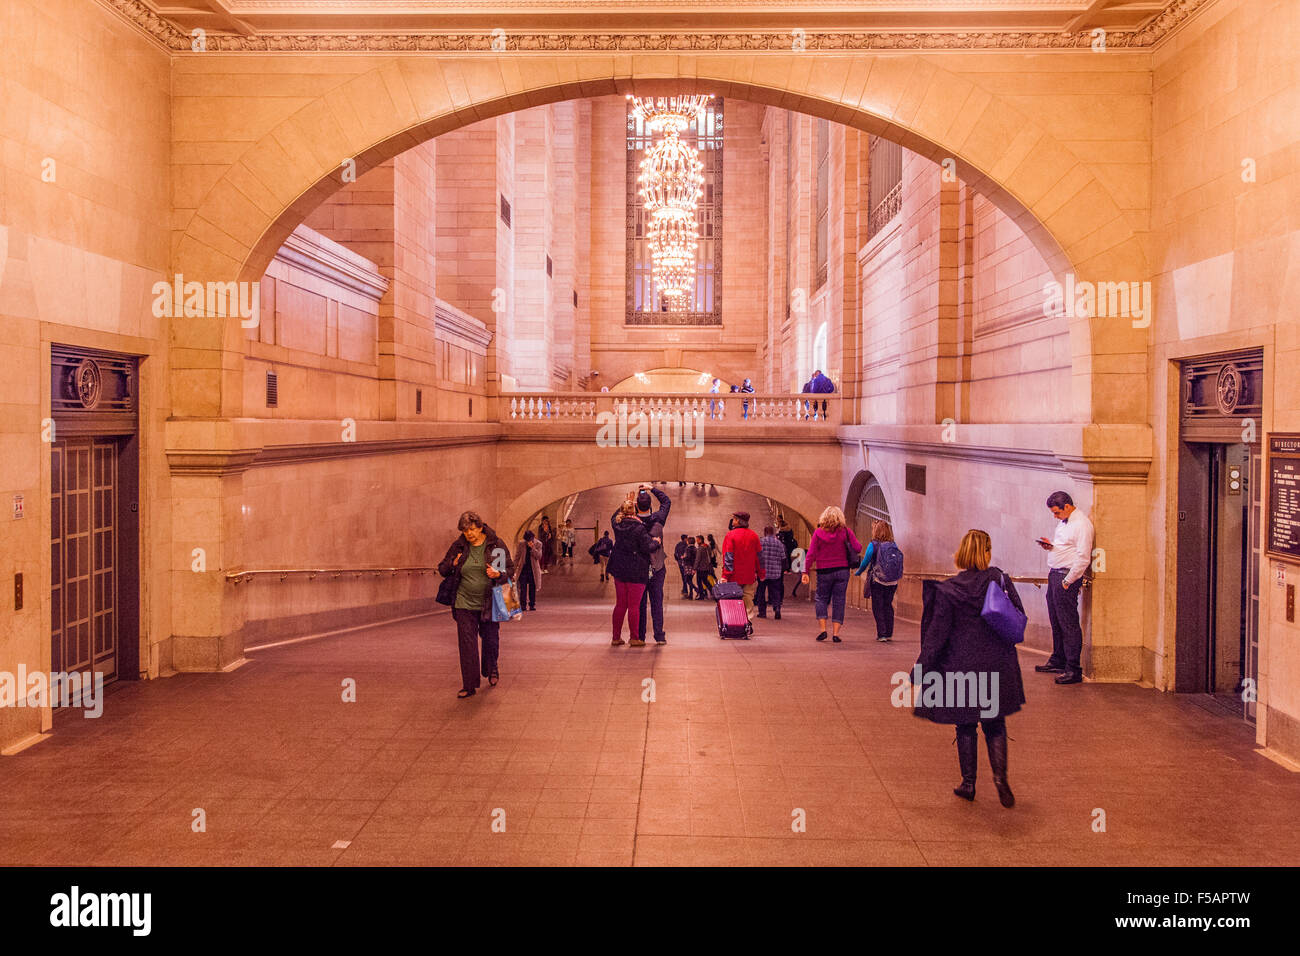 Whispering gallery in Grand Central terminal Station. Manhattan, New York City, United States of America. Stock Photo